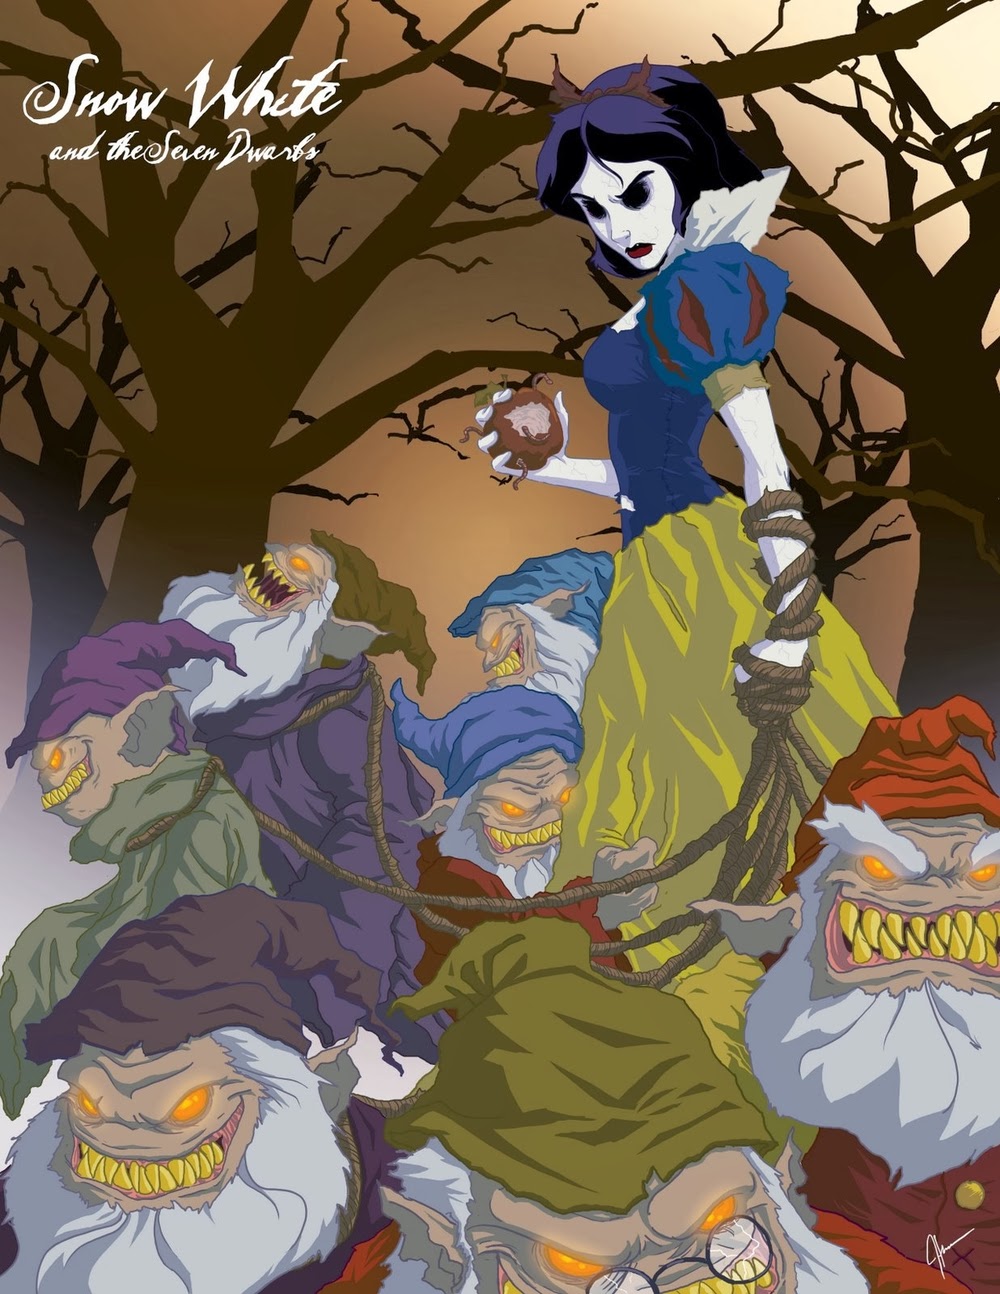 12-Snow-White-and-the-seven-dwarfs-Thomas-Twisted-Princess-www-designstack-co